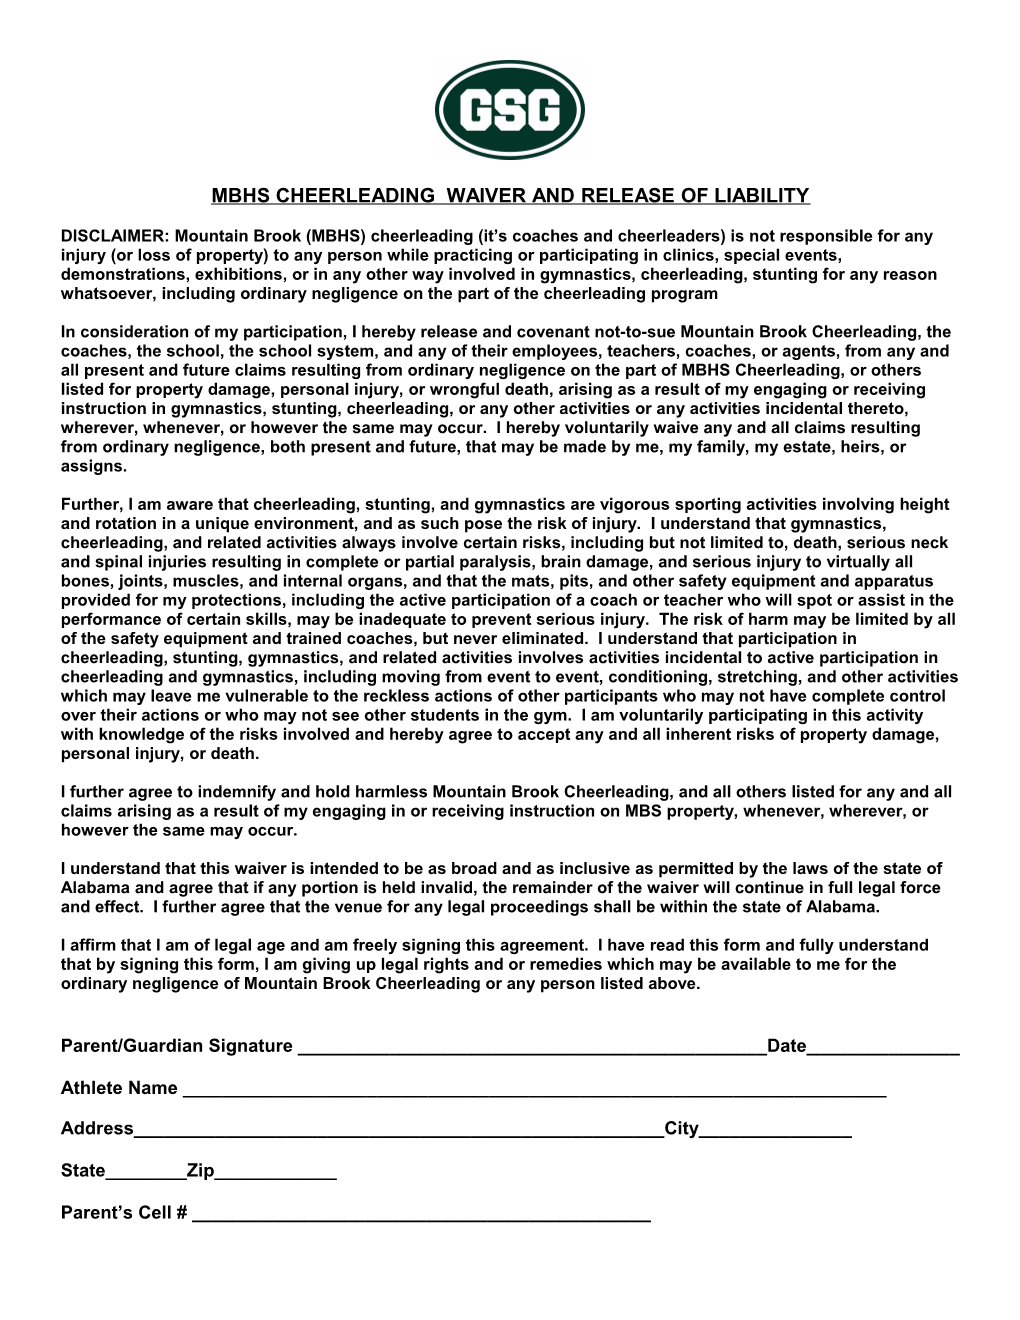 Waiver and Release of Liability s1